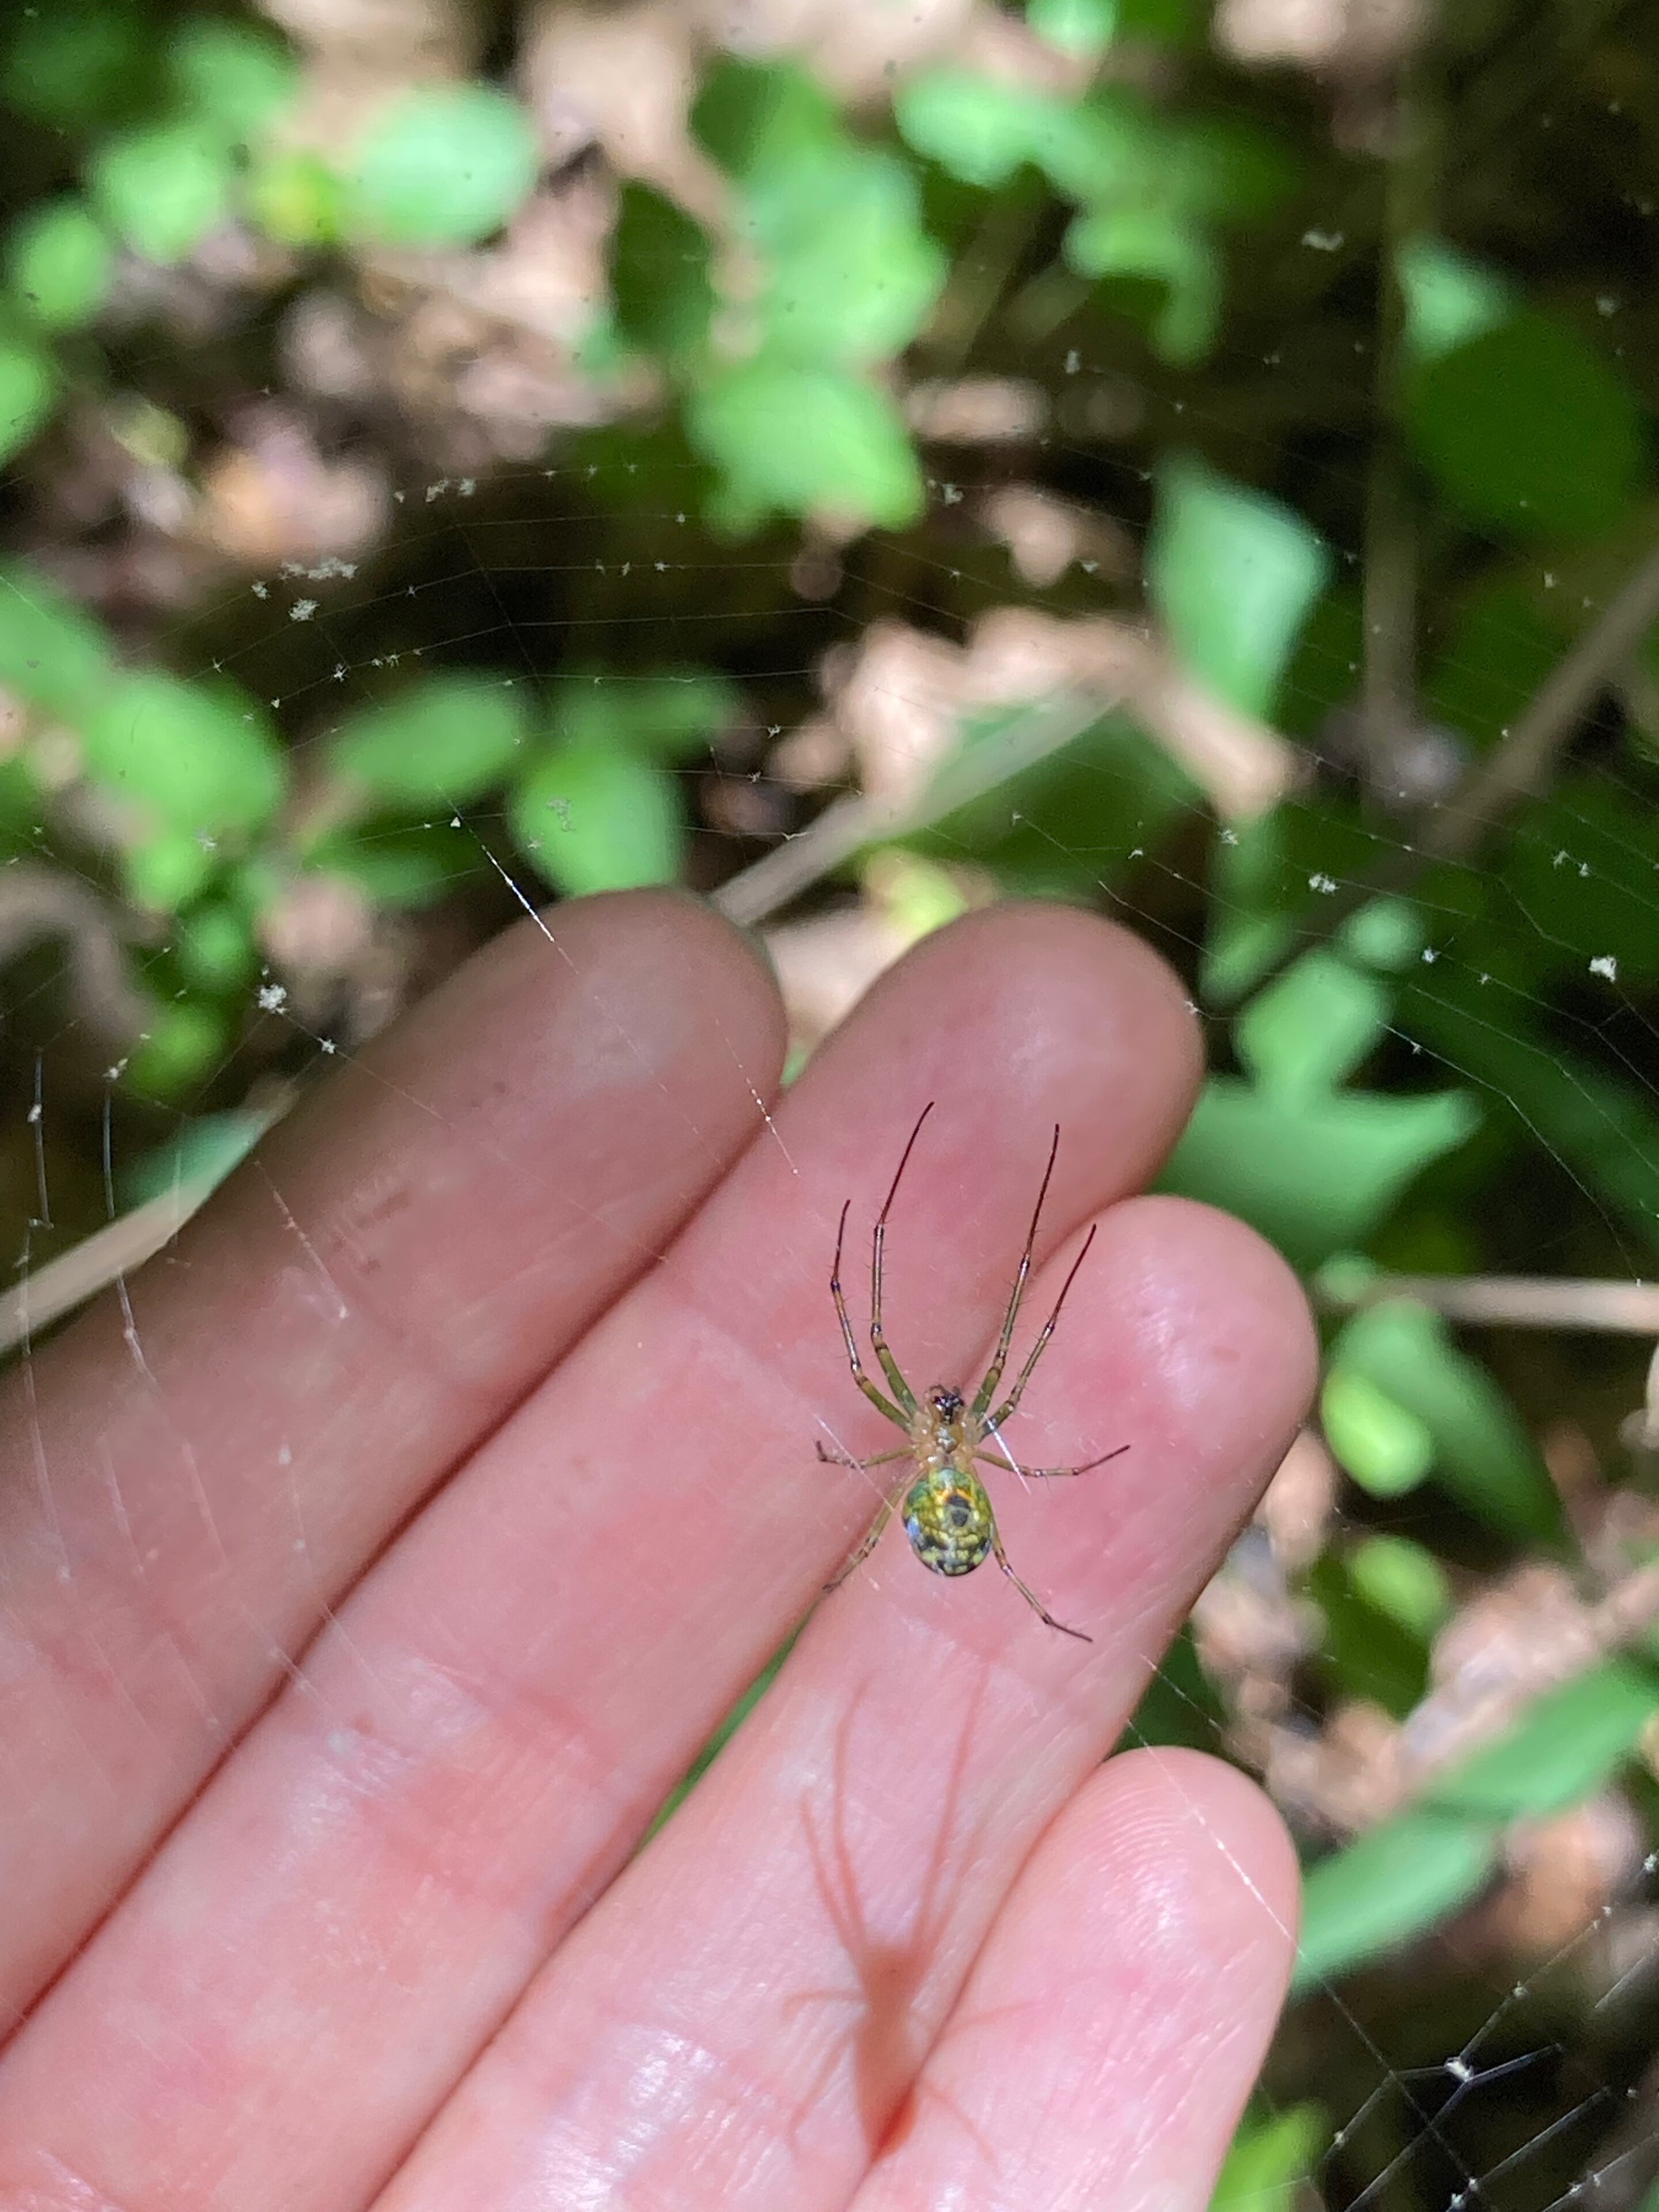 New study reveals that tree species diversity increases spider